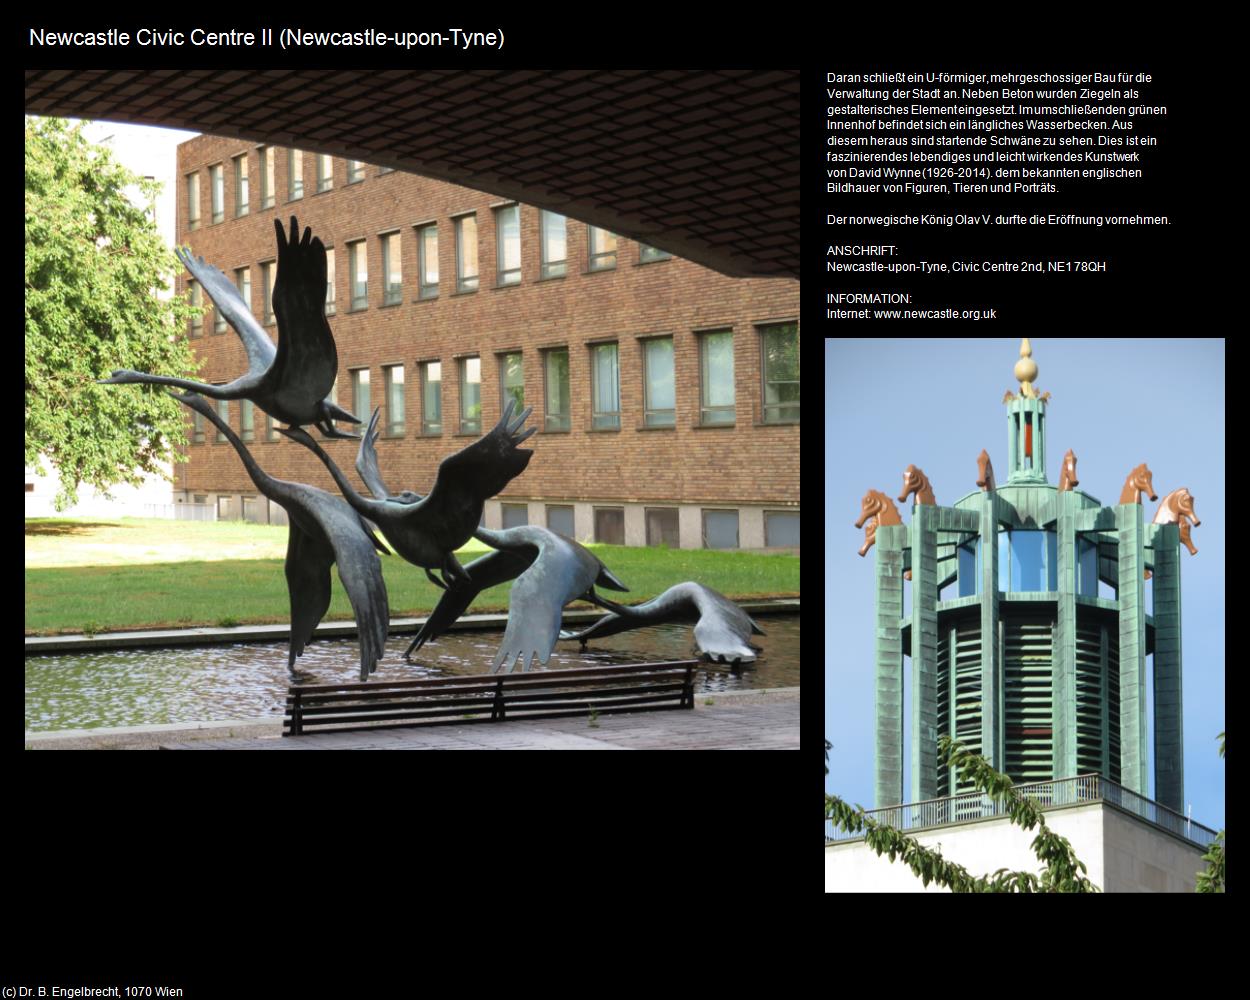 Newcastle Civic Centre II (Newcastle-upon-Tyne, England) in Kulturatlas-ENGLAND und WALES